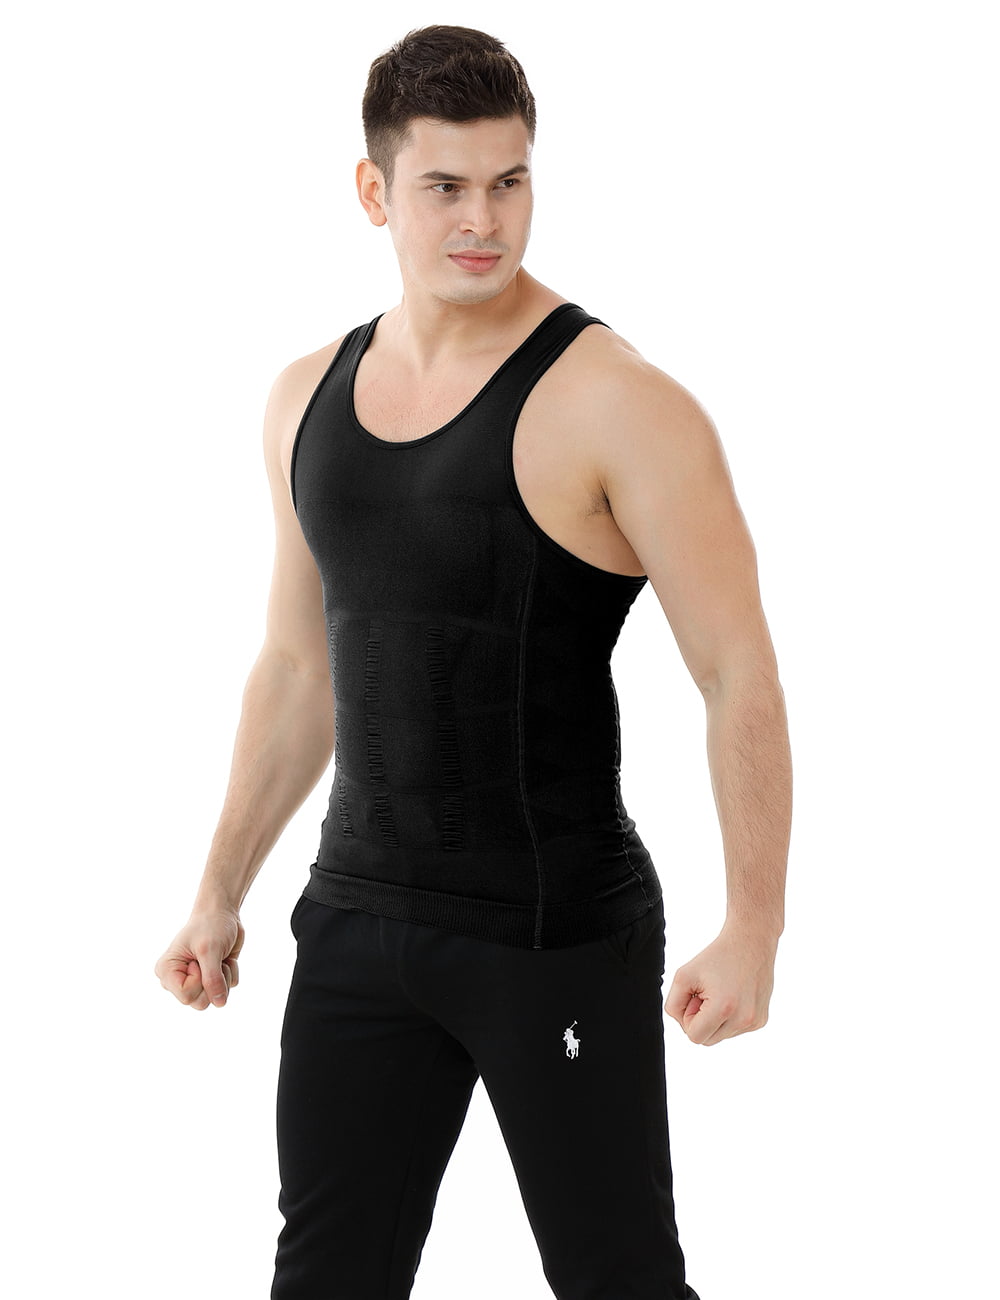 Mens Elastic Sculpting Vest Thermal Compression Base Layer Slim Compression Muscle Tank Shapewear for Men Size M Image Mens Body Shaper Slimming Shirt Tummy Waist Vest Lose Weight Shirt